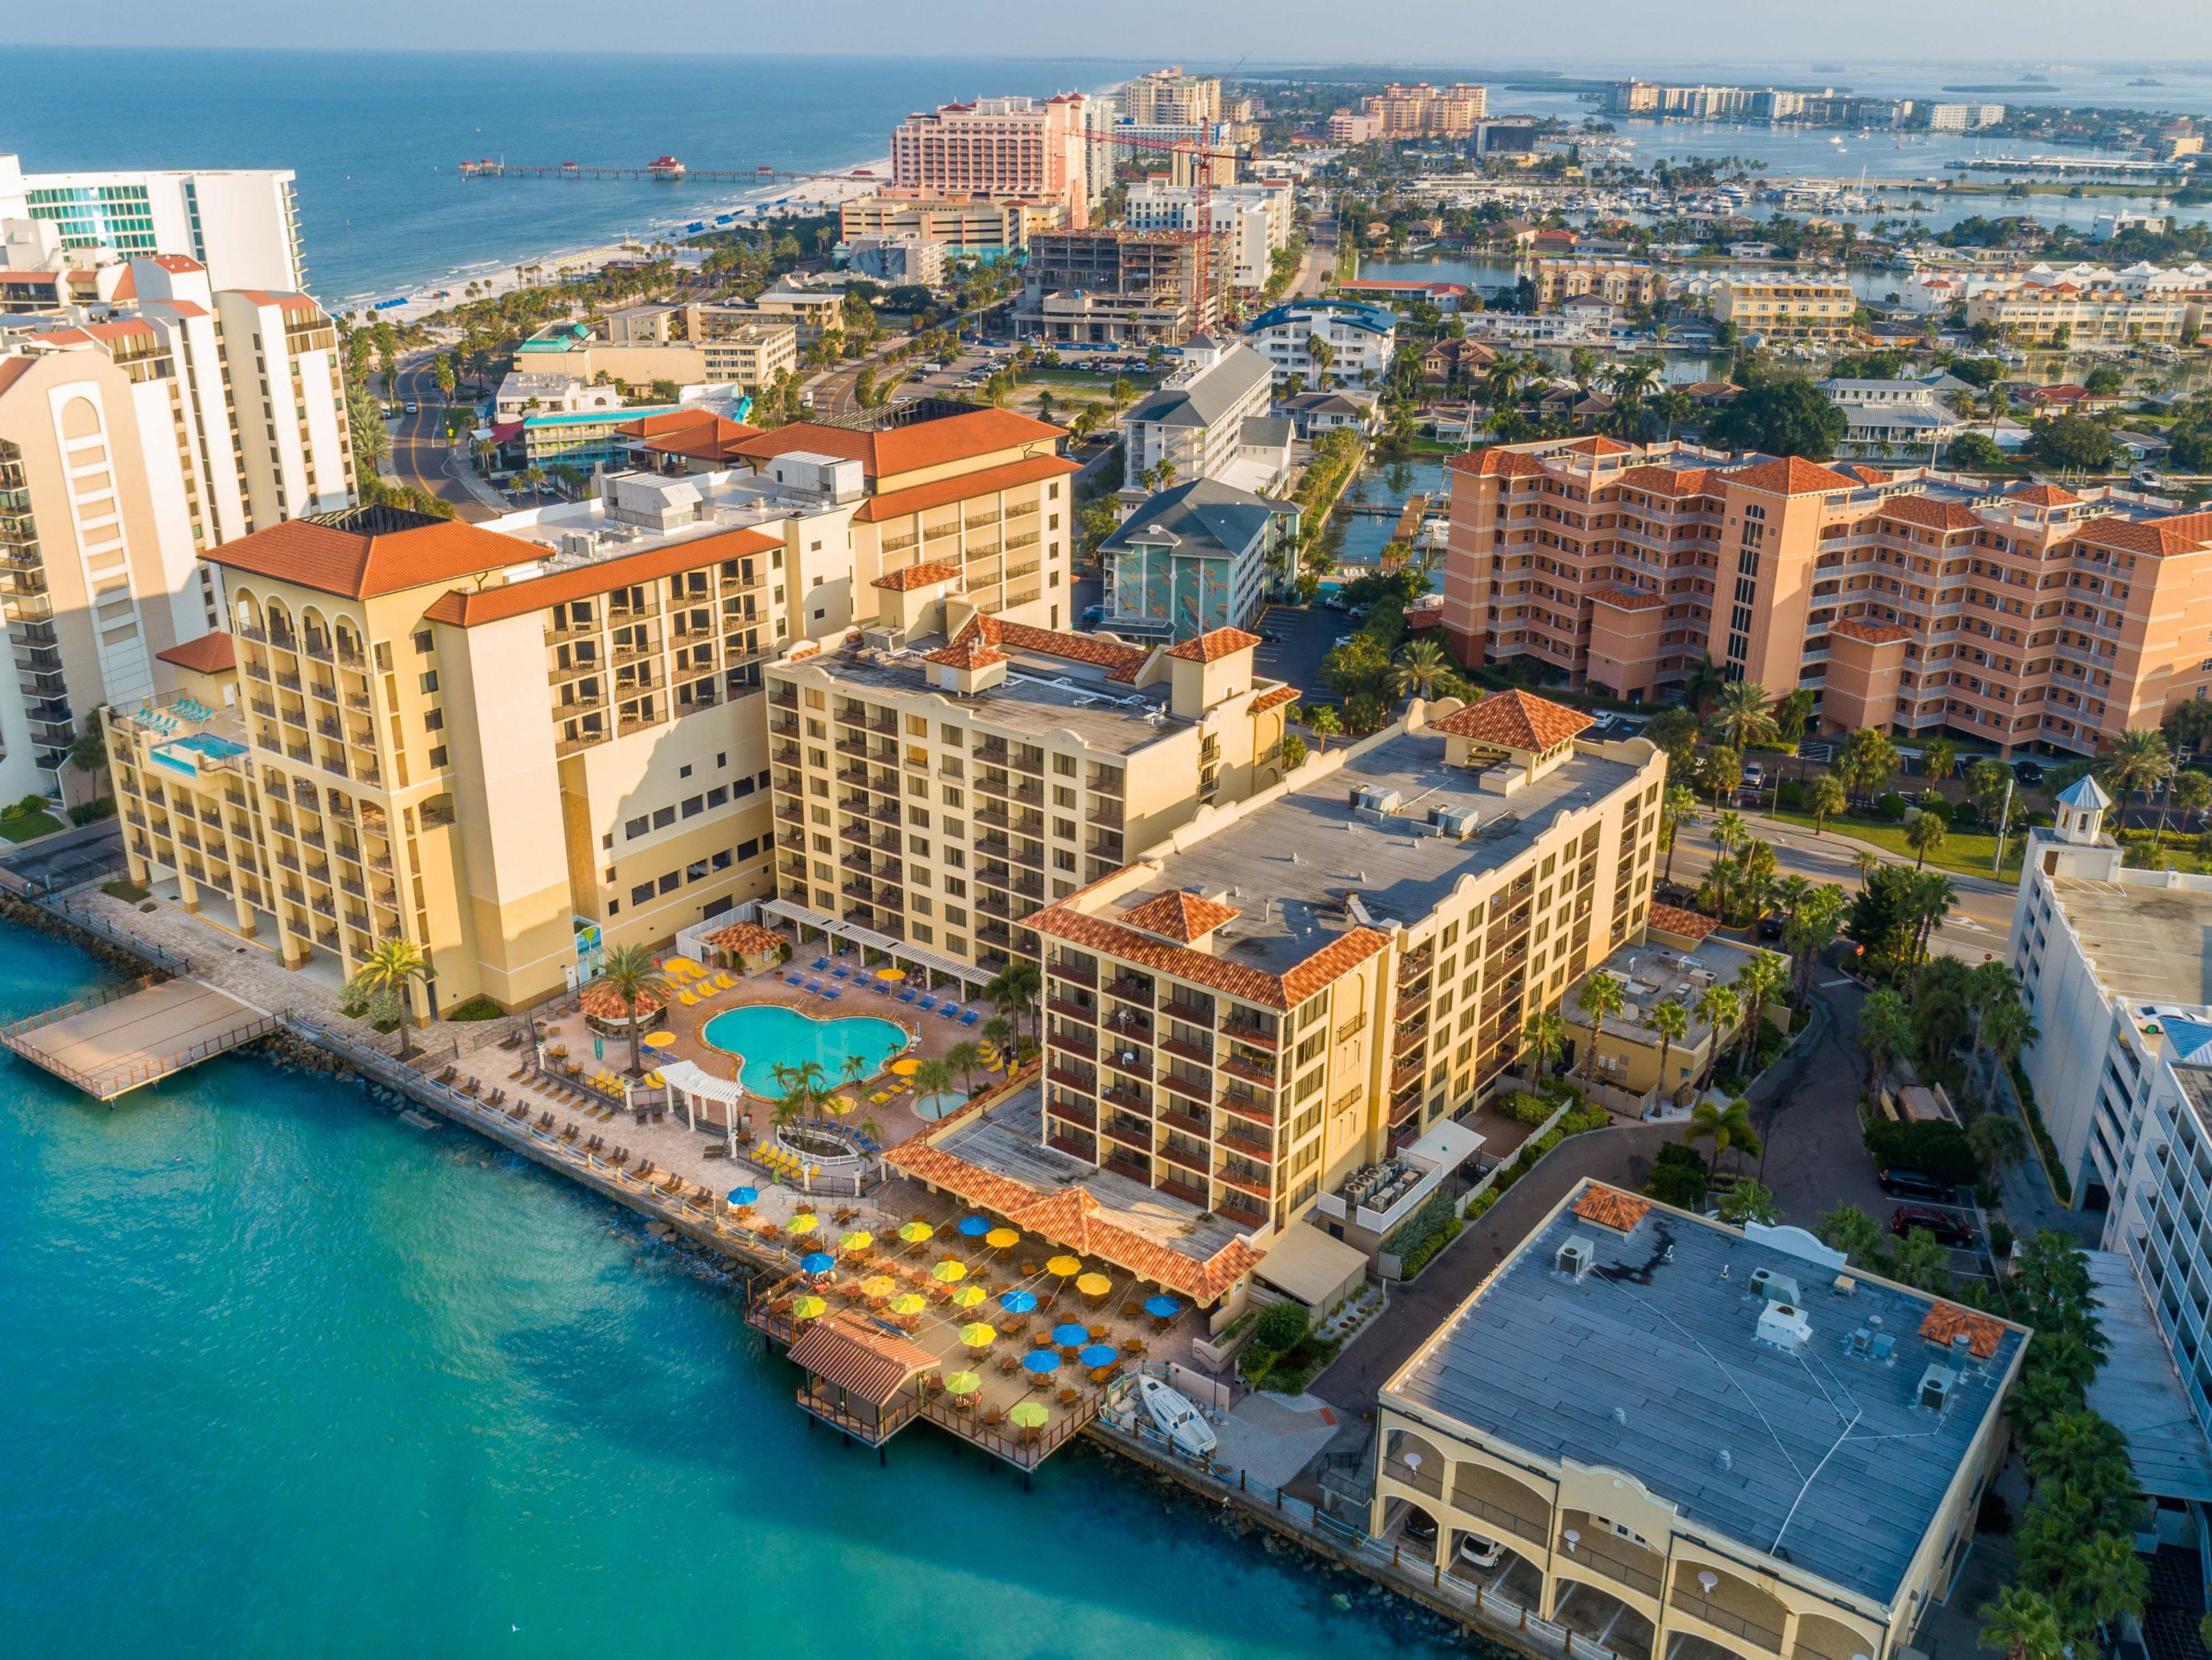 Experience beachfront fun just a five-minute walk from our hotel, where Clearwater’s public beach and legendary Pier 60 beckon. Dive into fishing adventures, indulge in delectable dining, shop to your heart's content, and soak up the vibrant entertainment scene. Explore and enjoy!